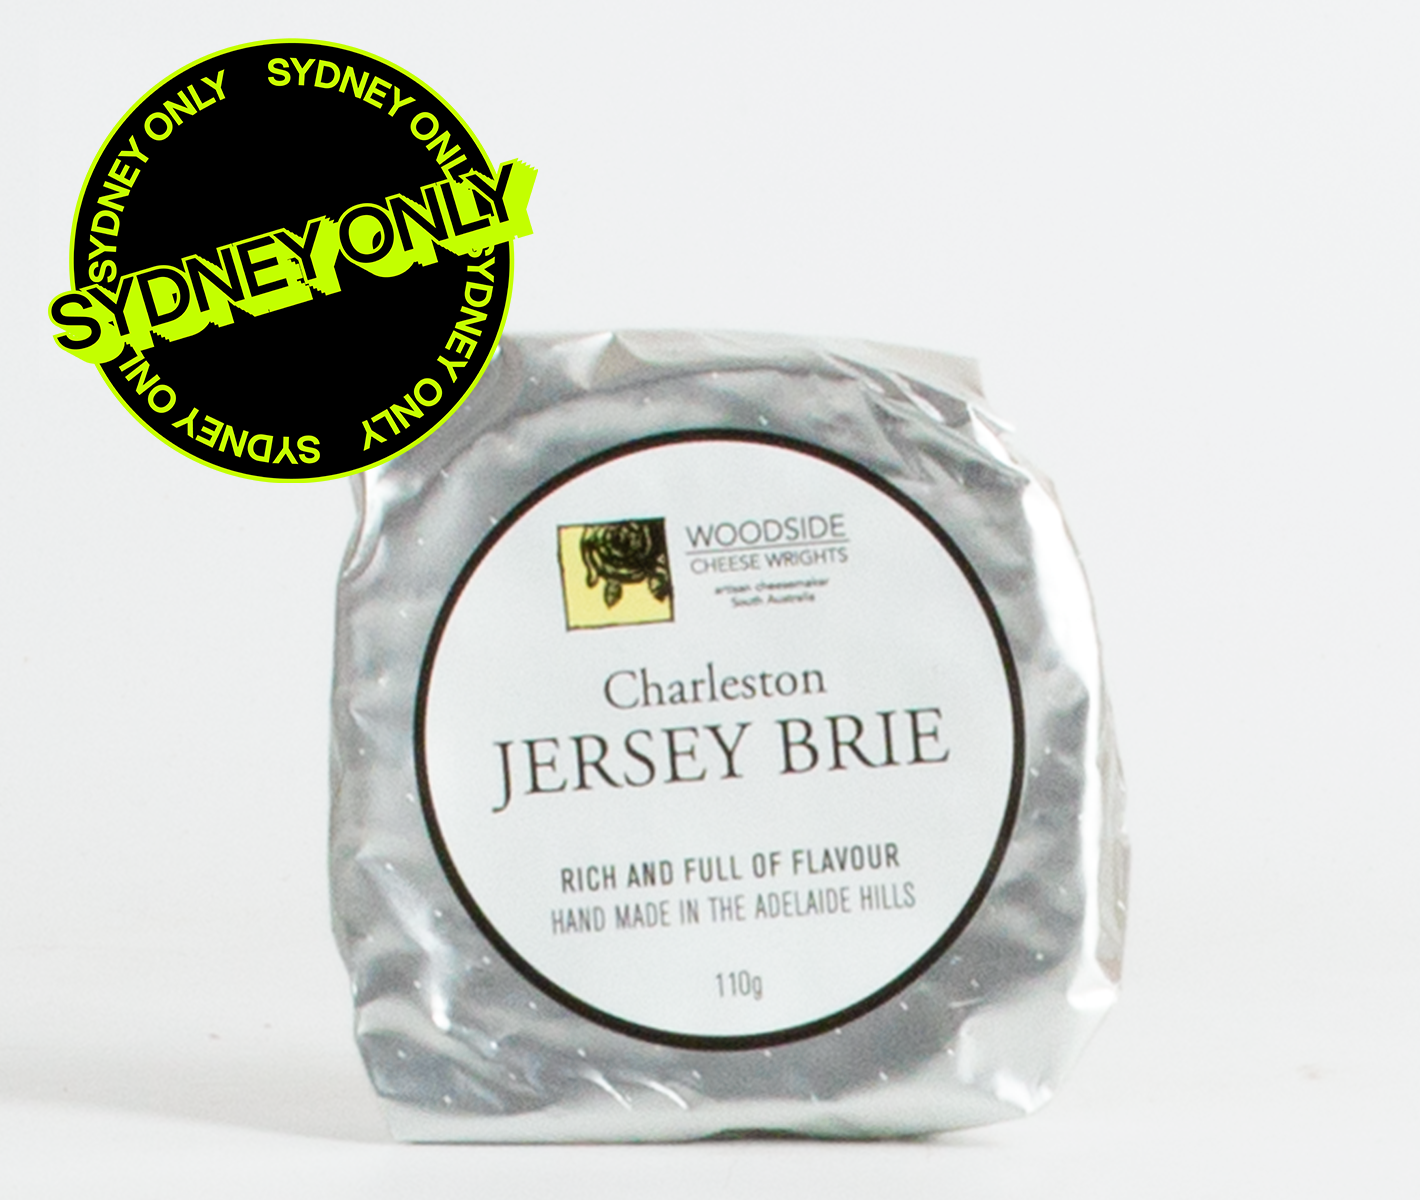 Woodside Cheese Wrights Charleston Jersey Brie (110g)